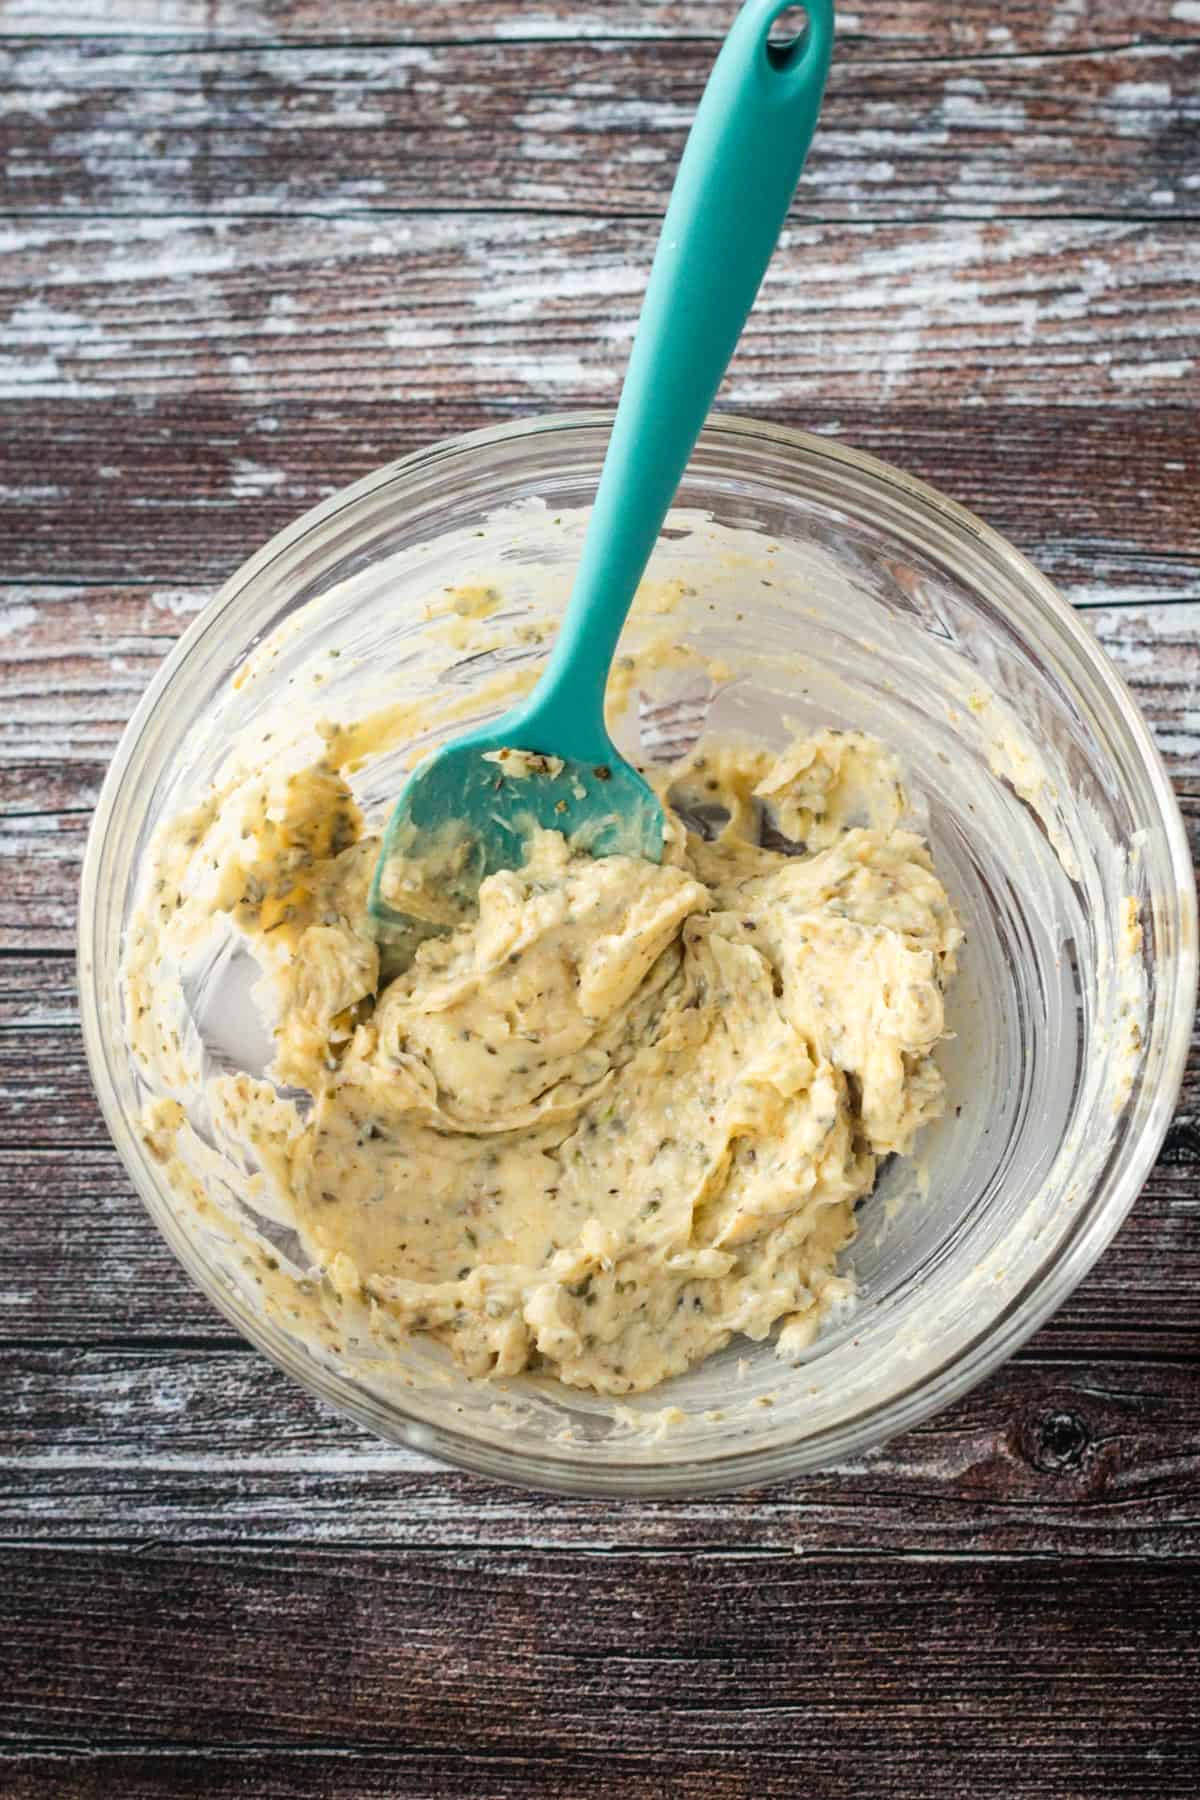 Compound butter ingredients mixed together in a bowl.